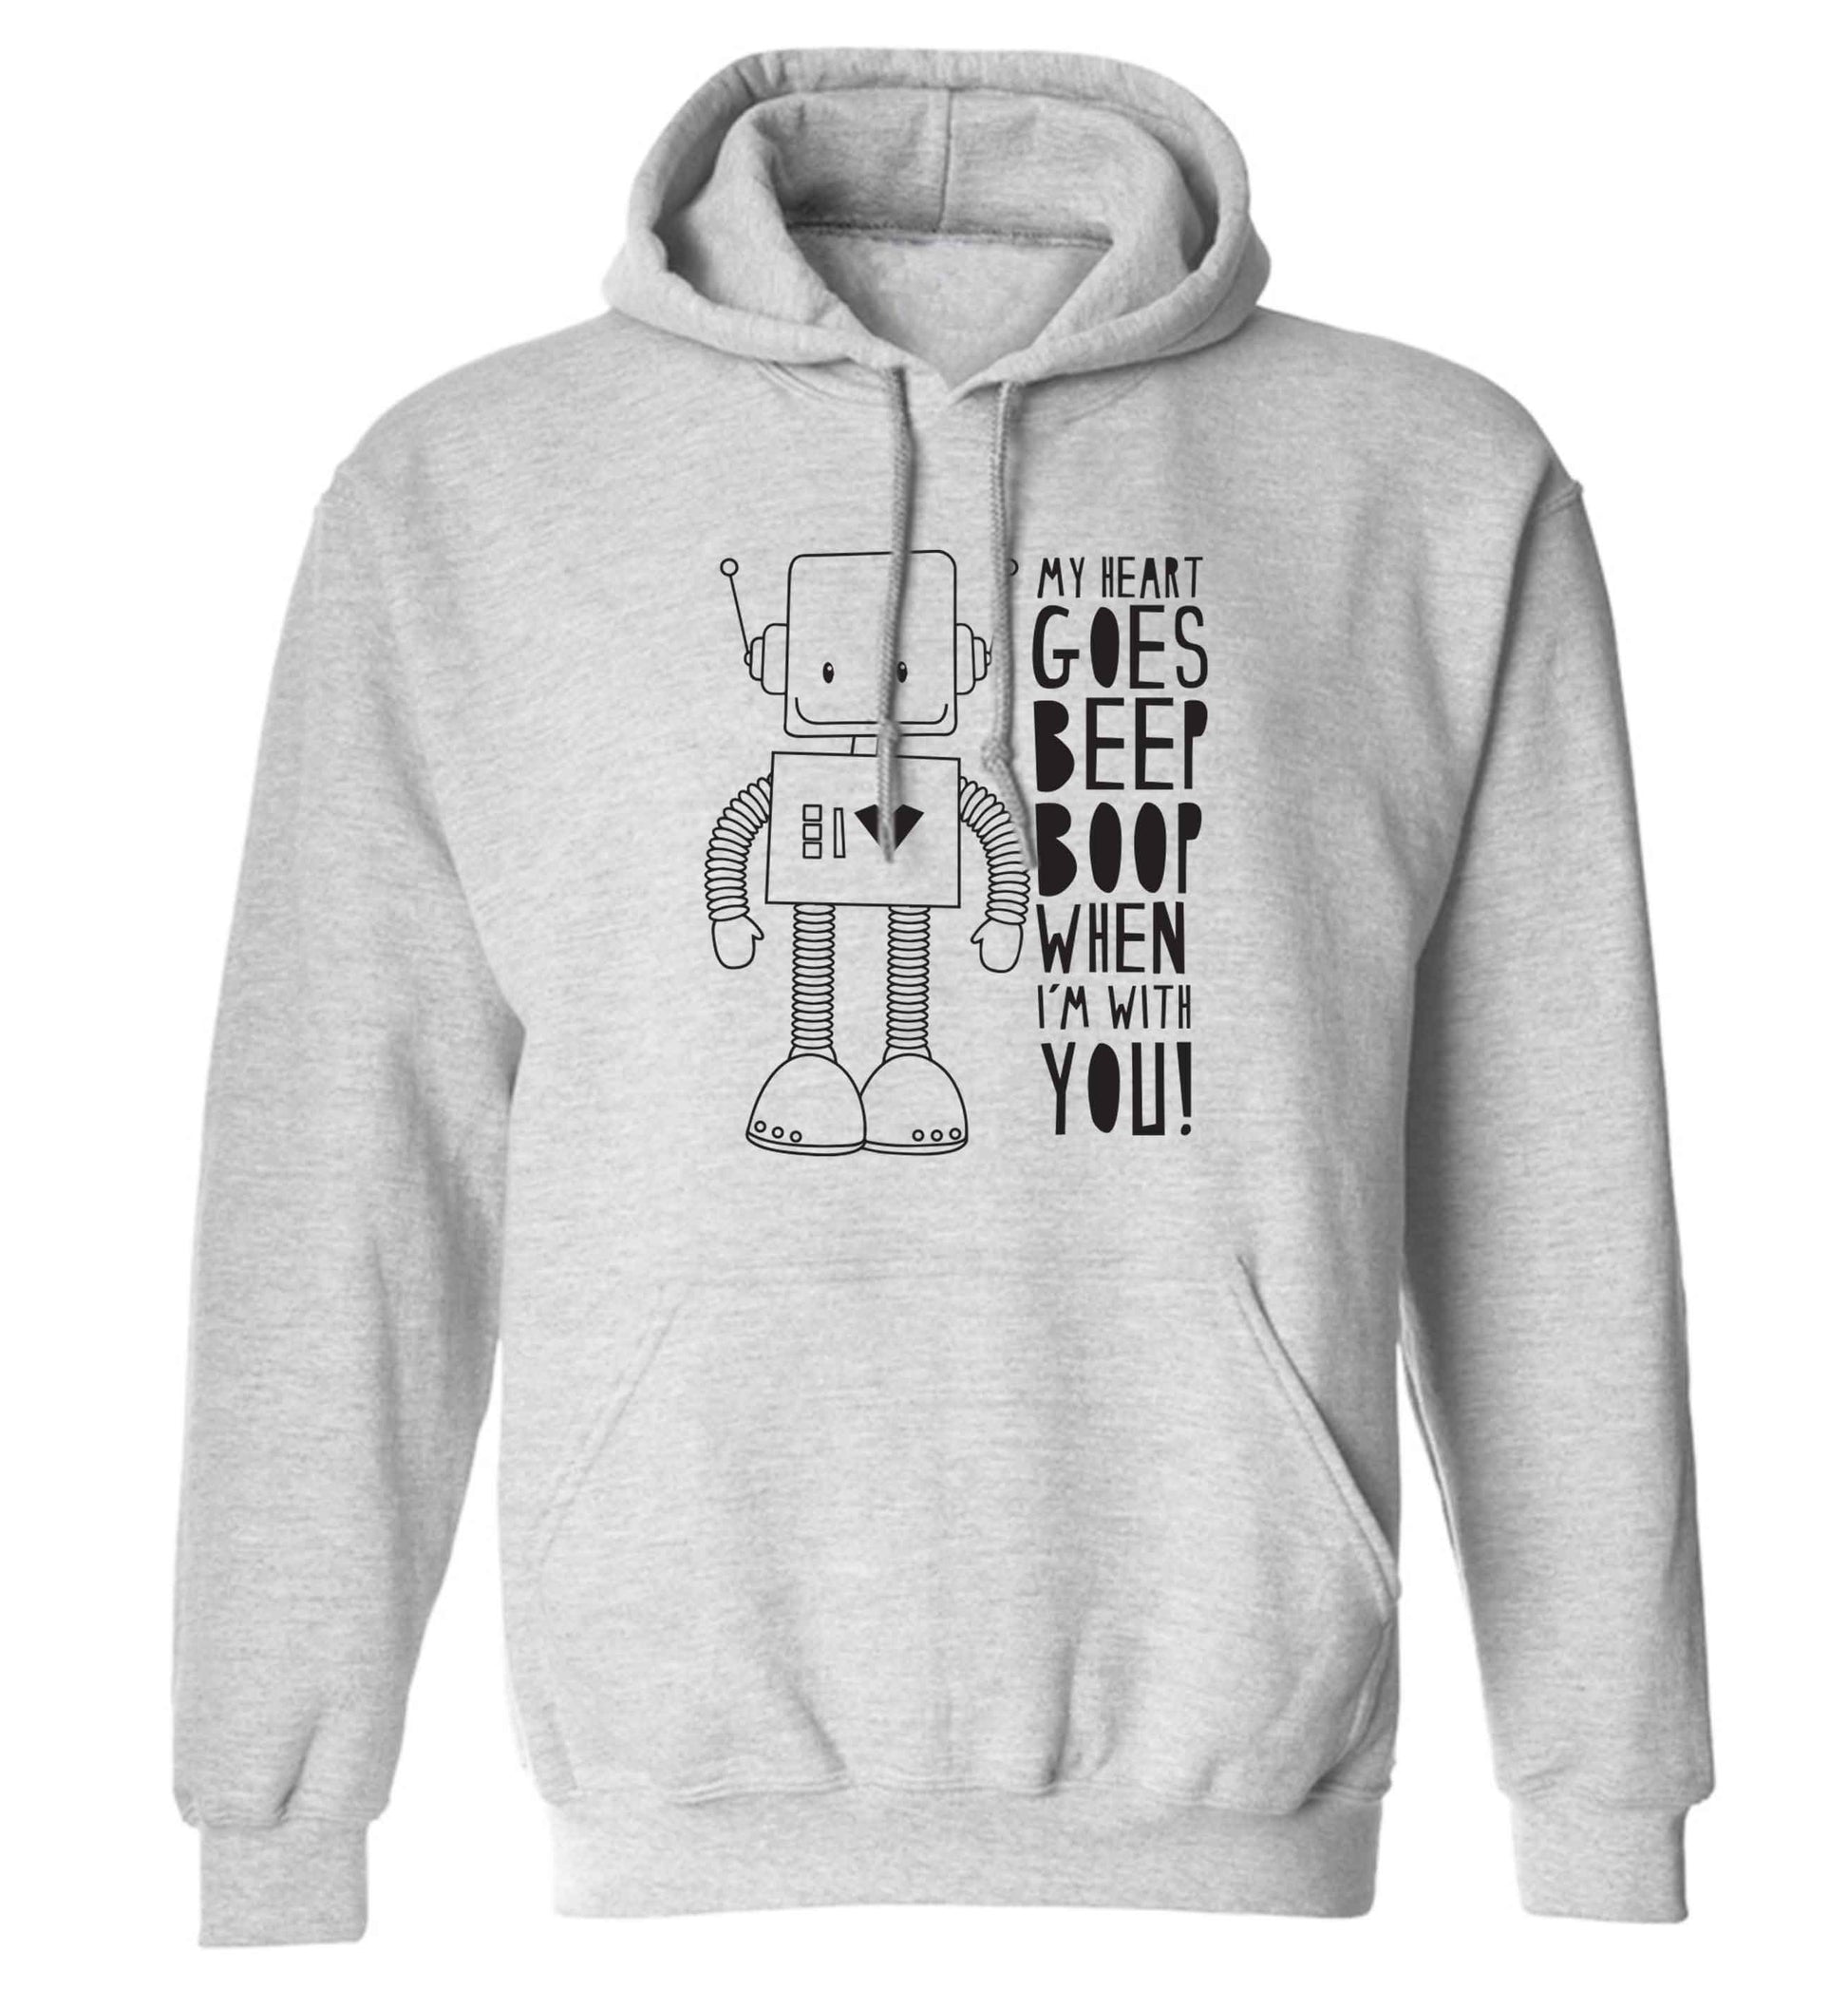 My heart goes beep boop when I'm with you adults unisex grey hoodie 2XL